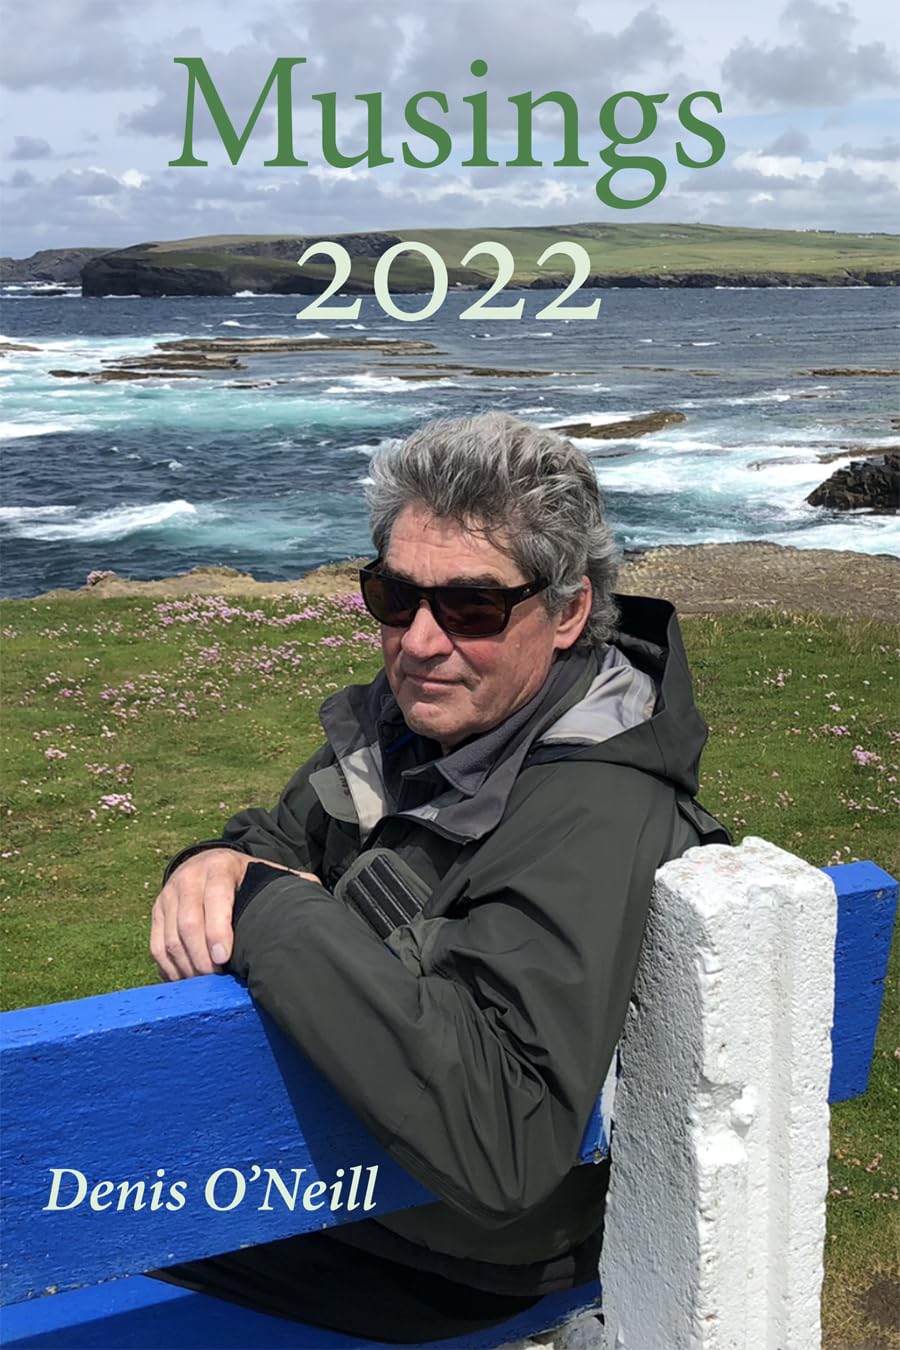 Musings 2022 by Denis O'Neill